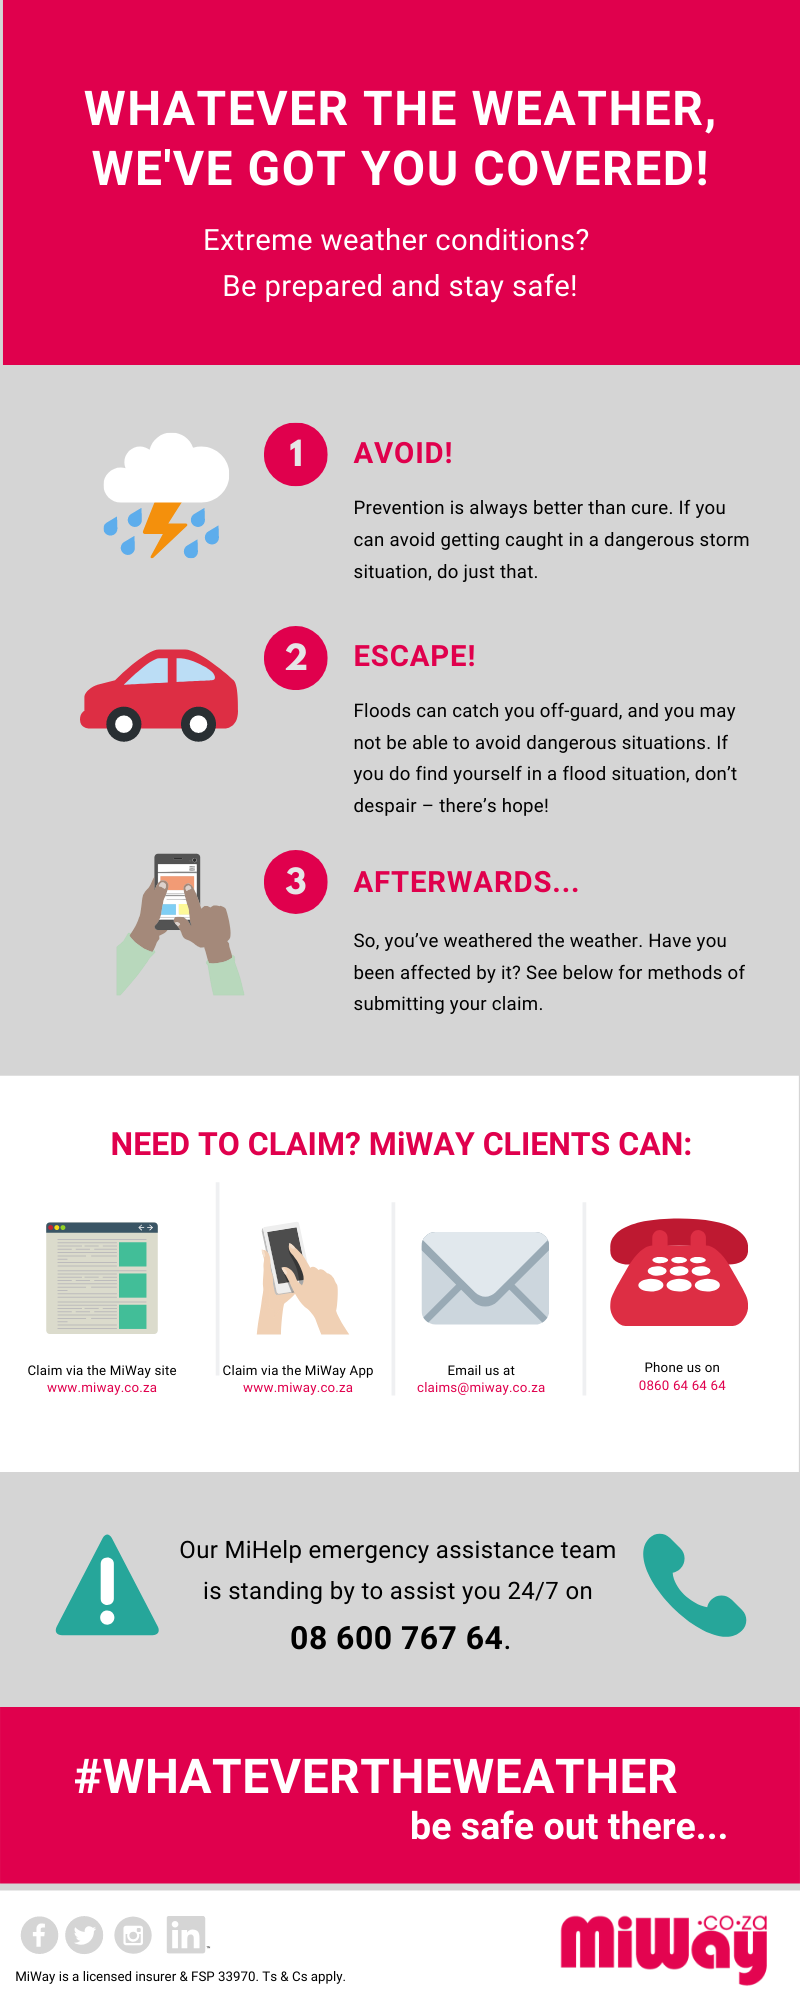 Extreme weather conditions? MiWay helps you to be prepared and stay safe!